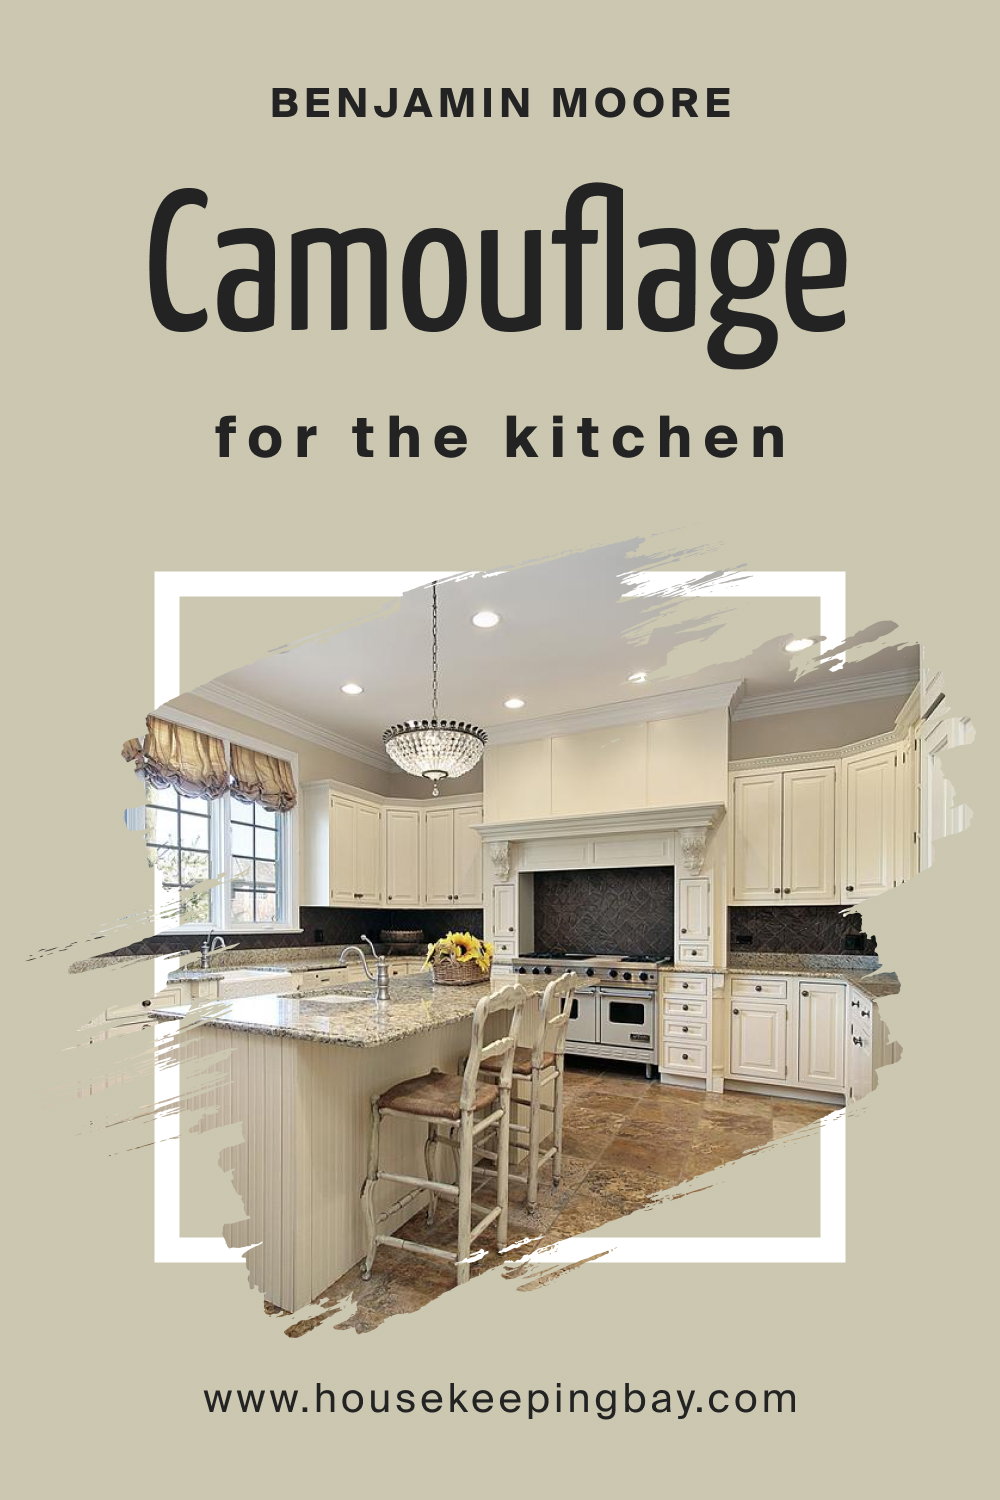 How to Use BM Camouflage 2143-40 in the Kitchen?